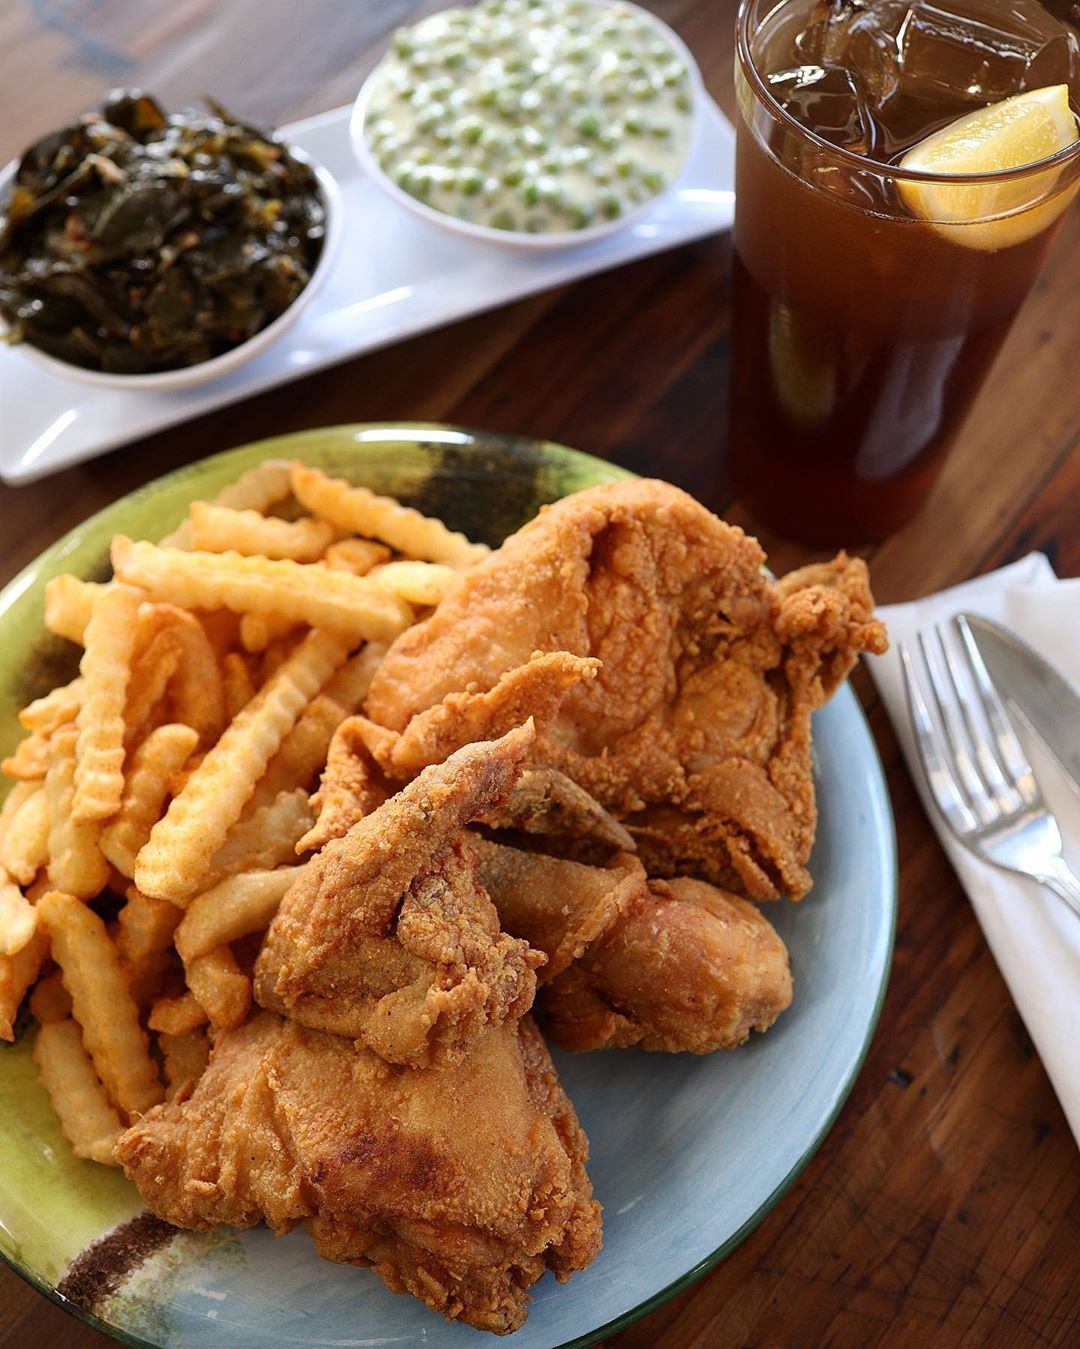 fried chicken from the Beach Road Fish House & Chicken Dinners photo by Instagram user @natedoesfood